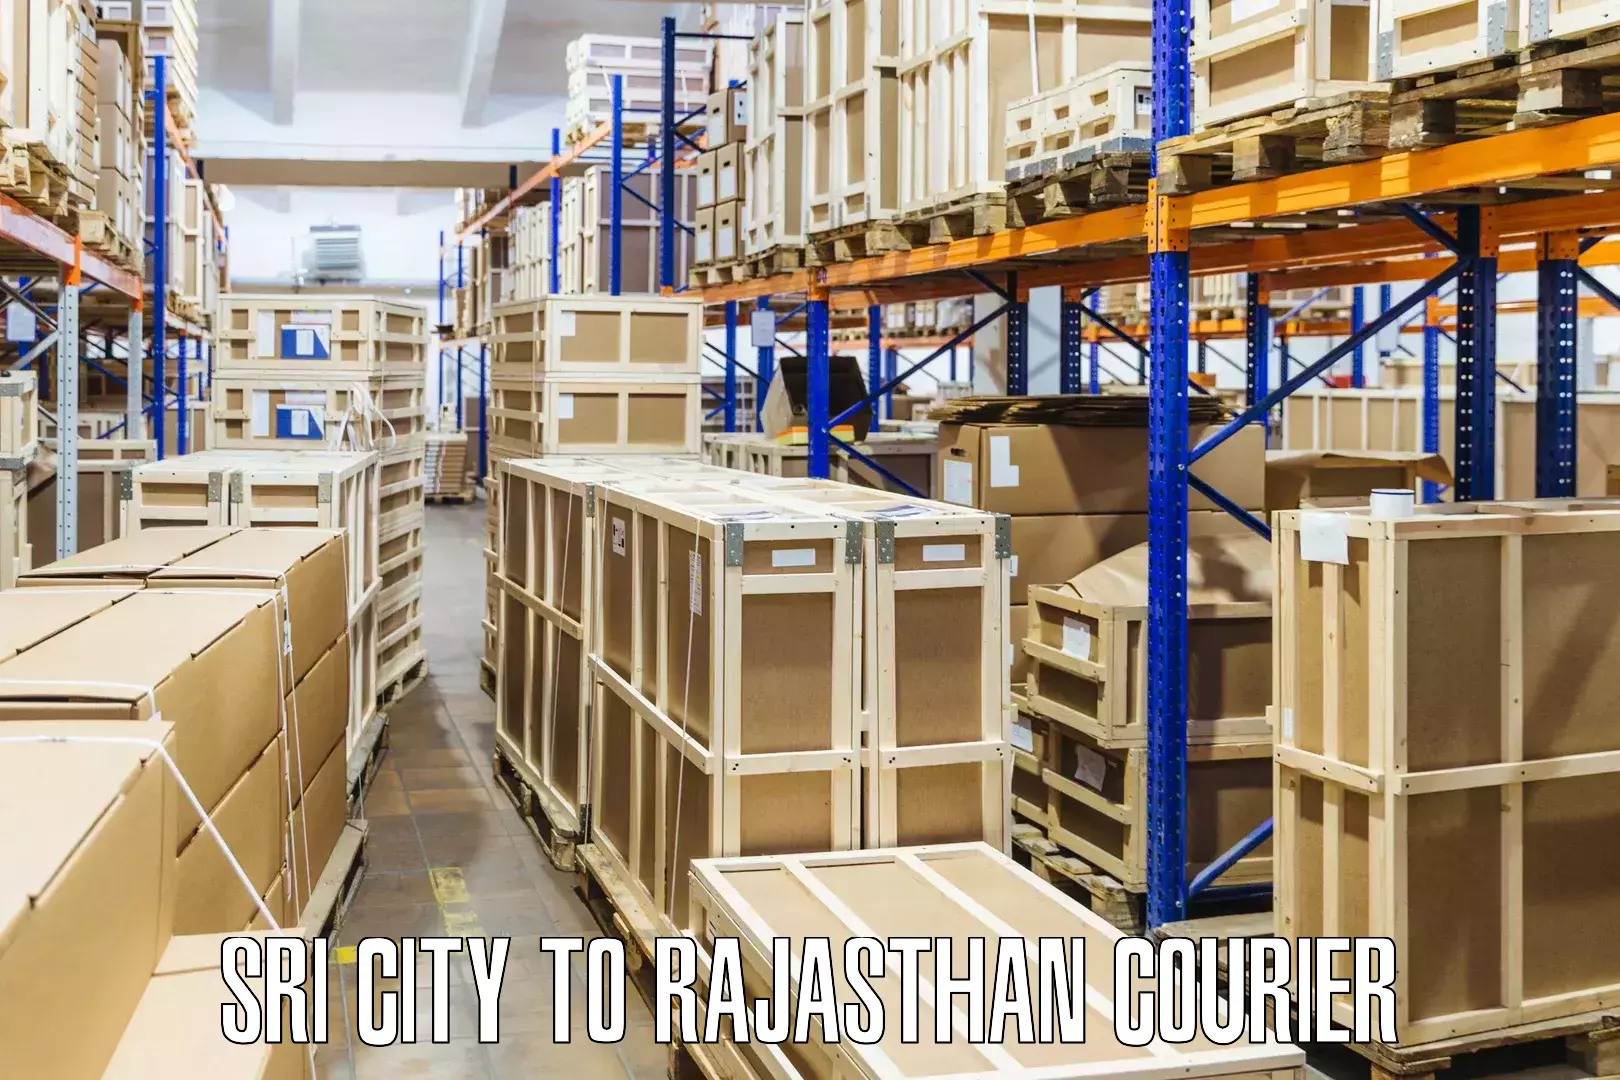 Quality courier services Sri City to Fatehpur Sikar